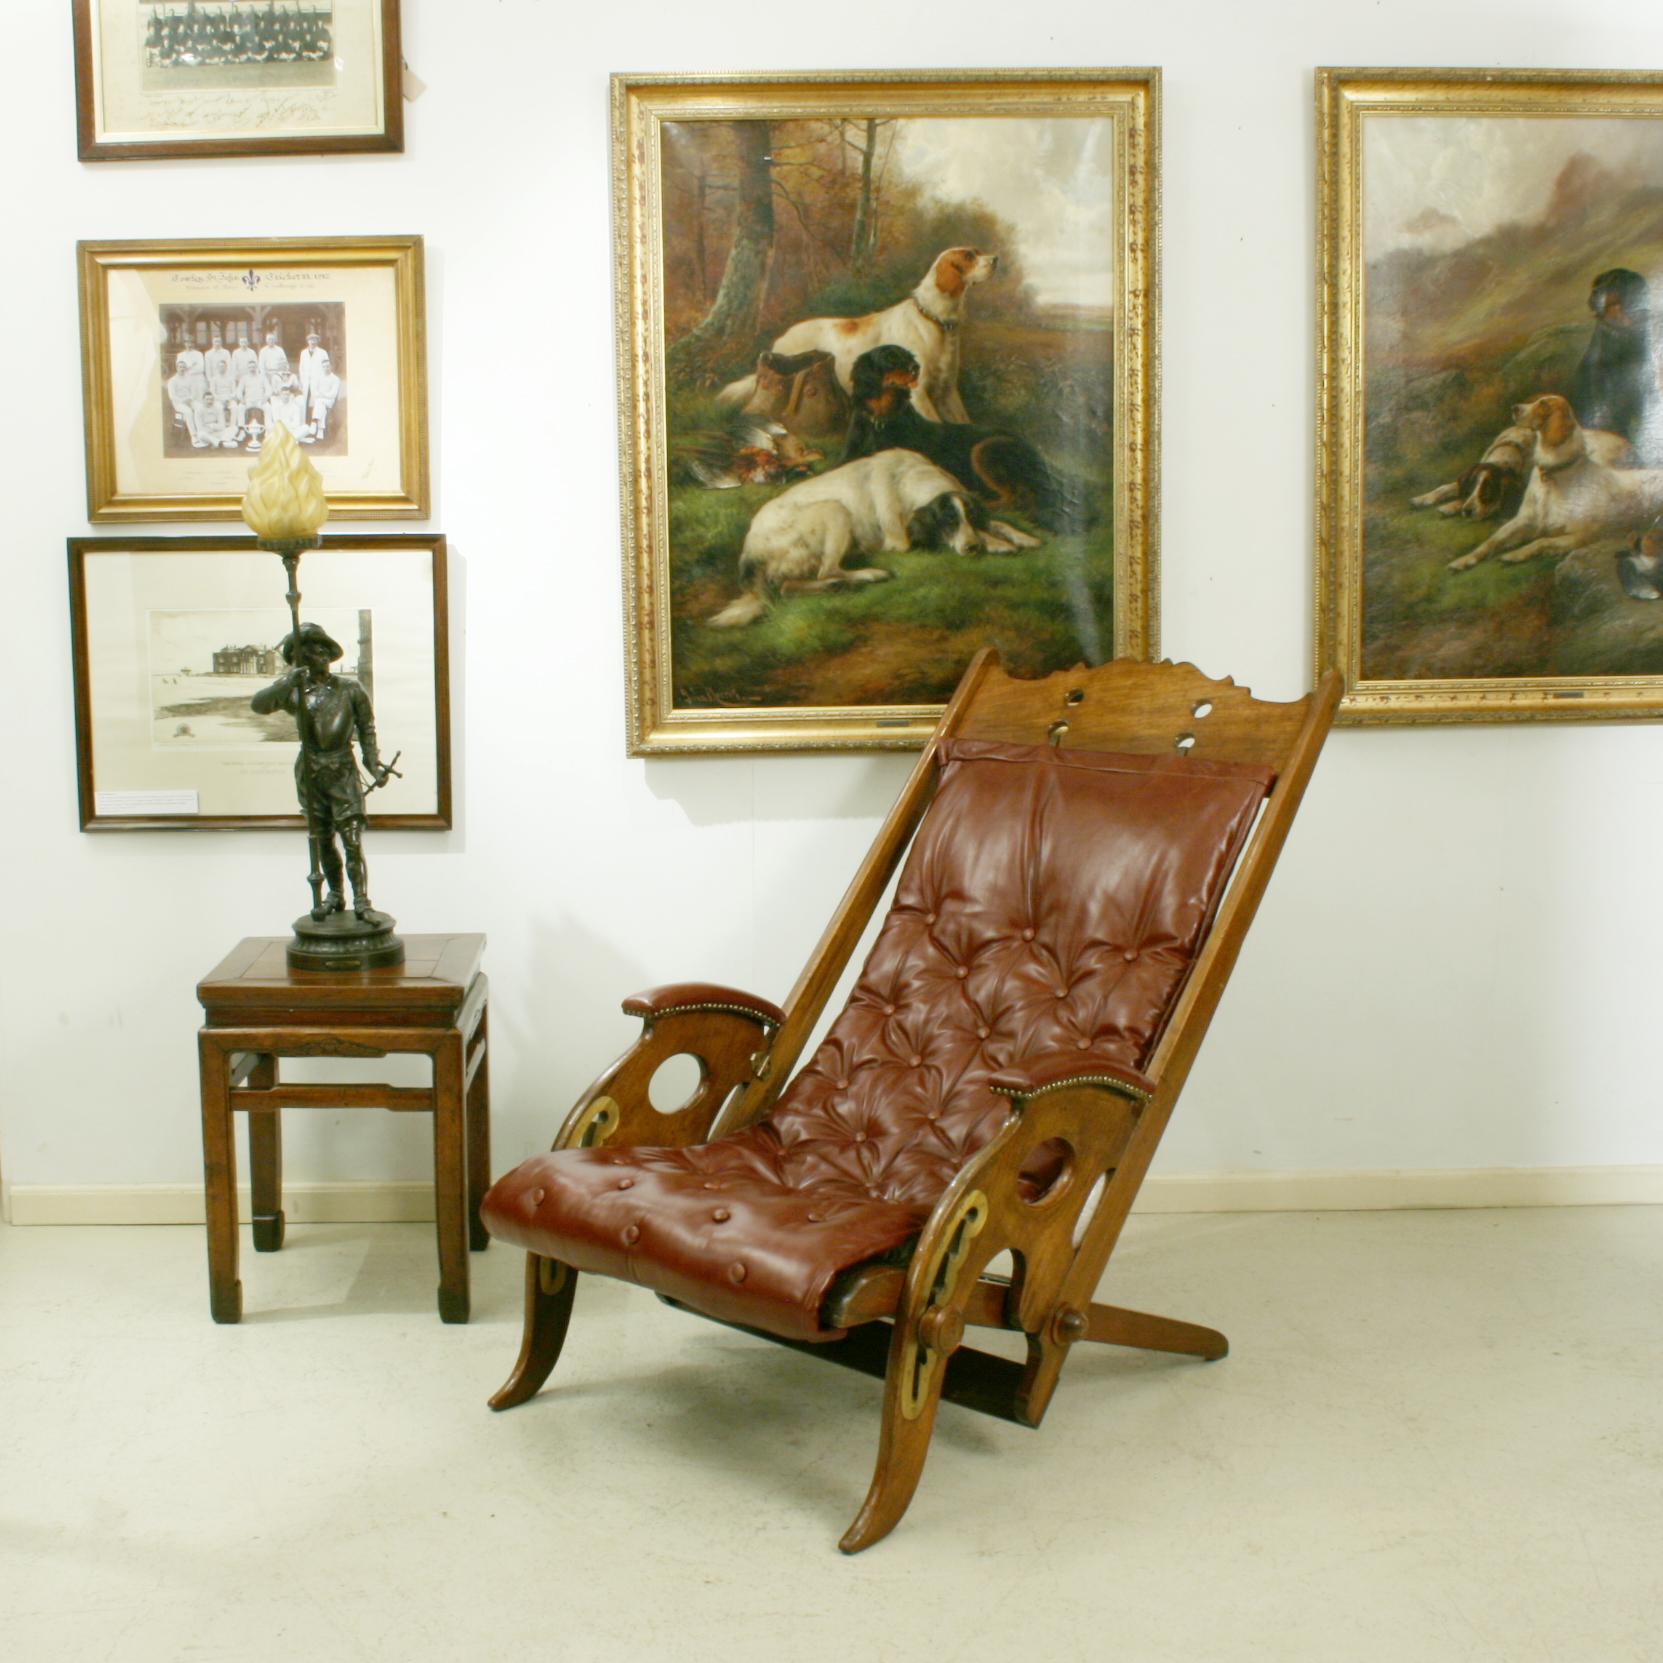 Reclining colonial campaign Chair.
A wonderful Anglo-Indian folding chair with an oxblood red leather slung seat and leather padded arms. The original design of this type of chair is attributed to J. Herbert McNair, he was part of the influential